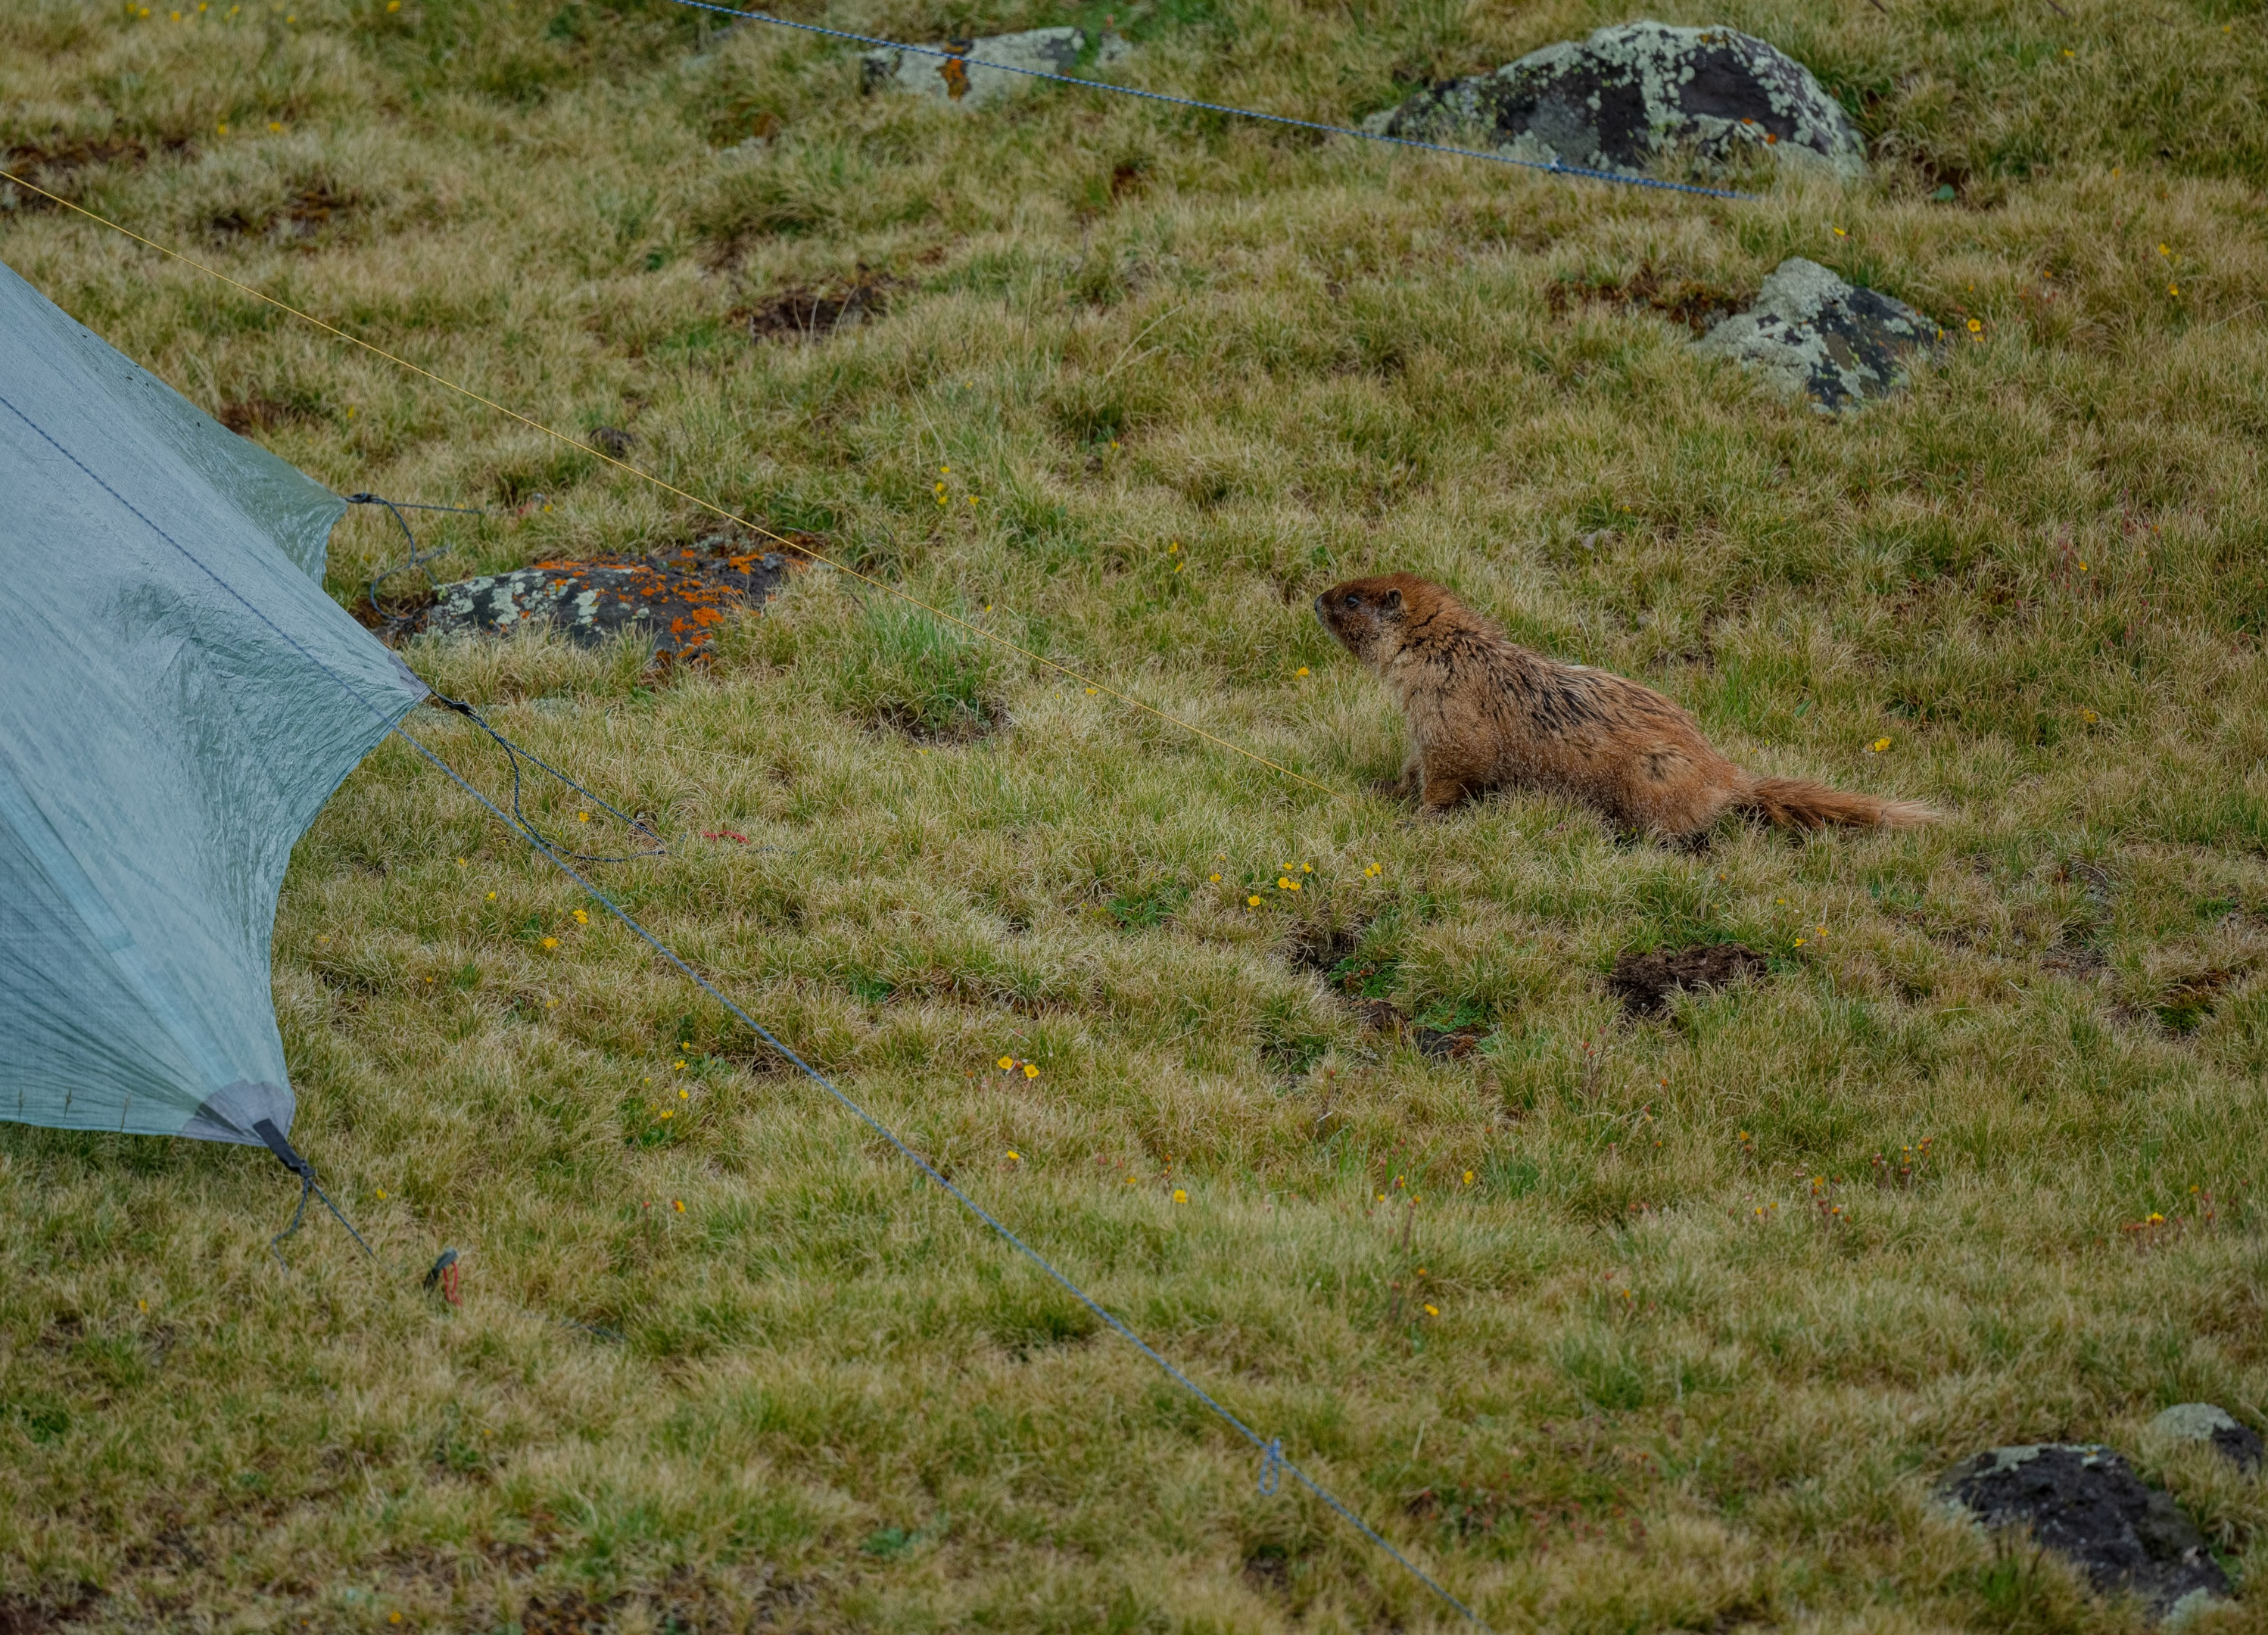 A marmot checking out a tent in an alpine campsite 